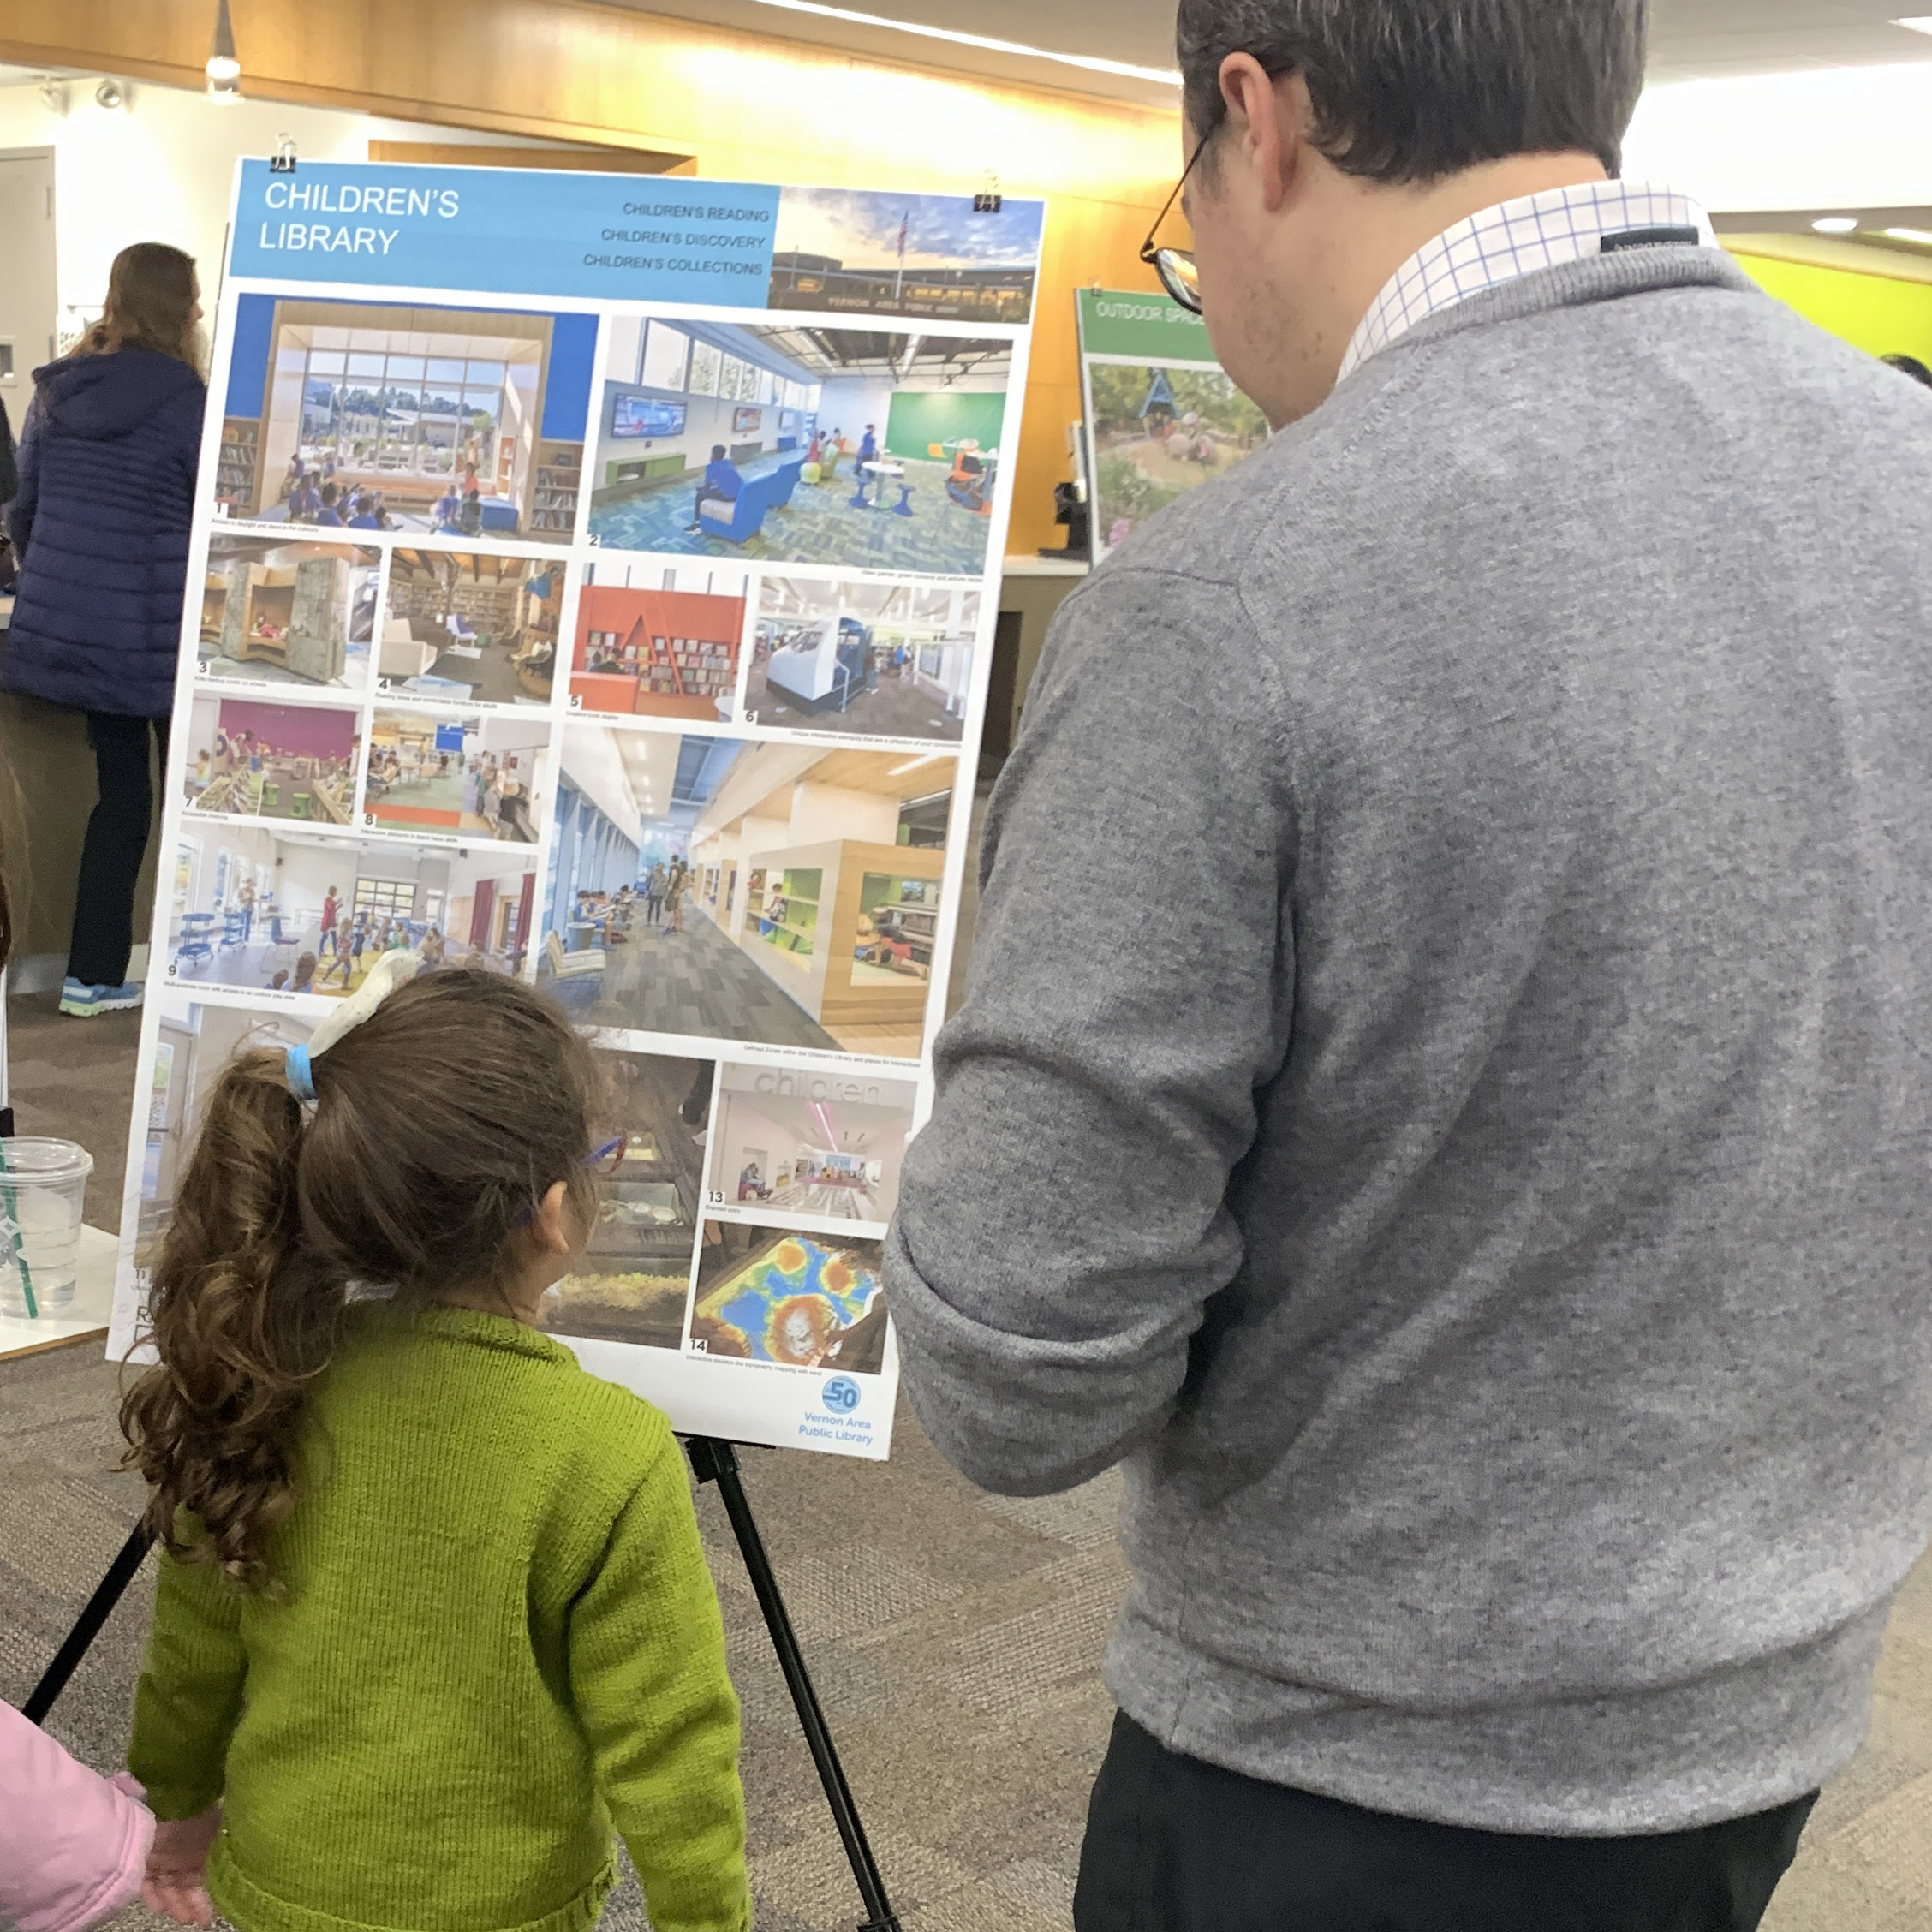 A young girl looks at a poster board filled with pictures of children's libraries. An adult man looks over her shoulder.